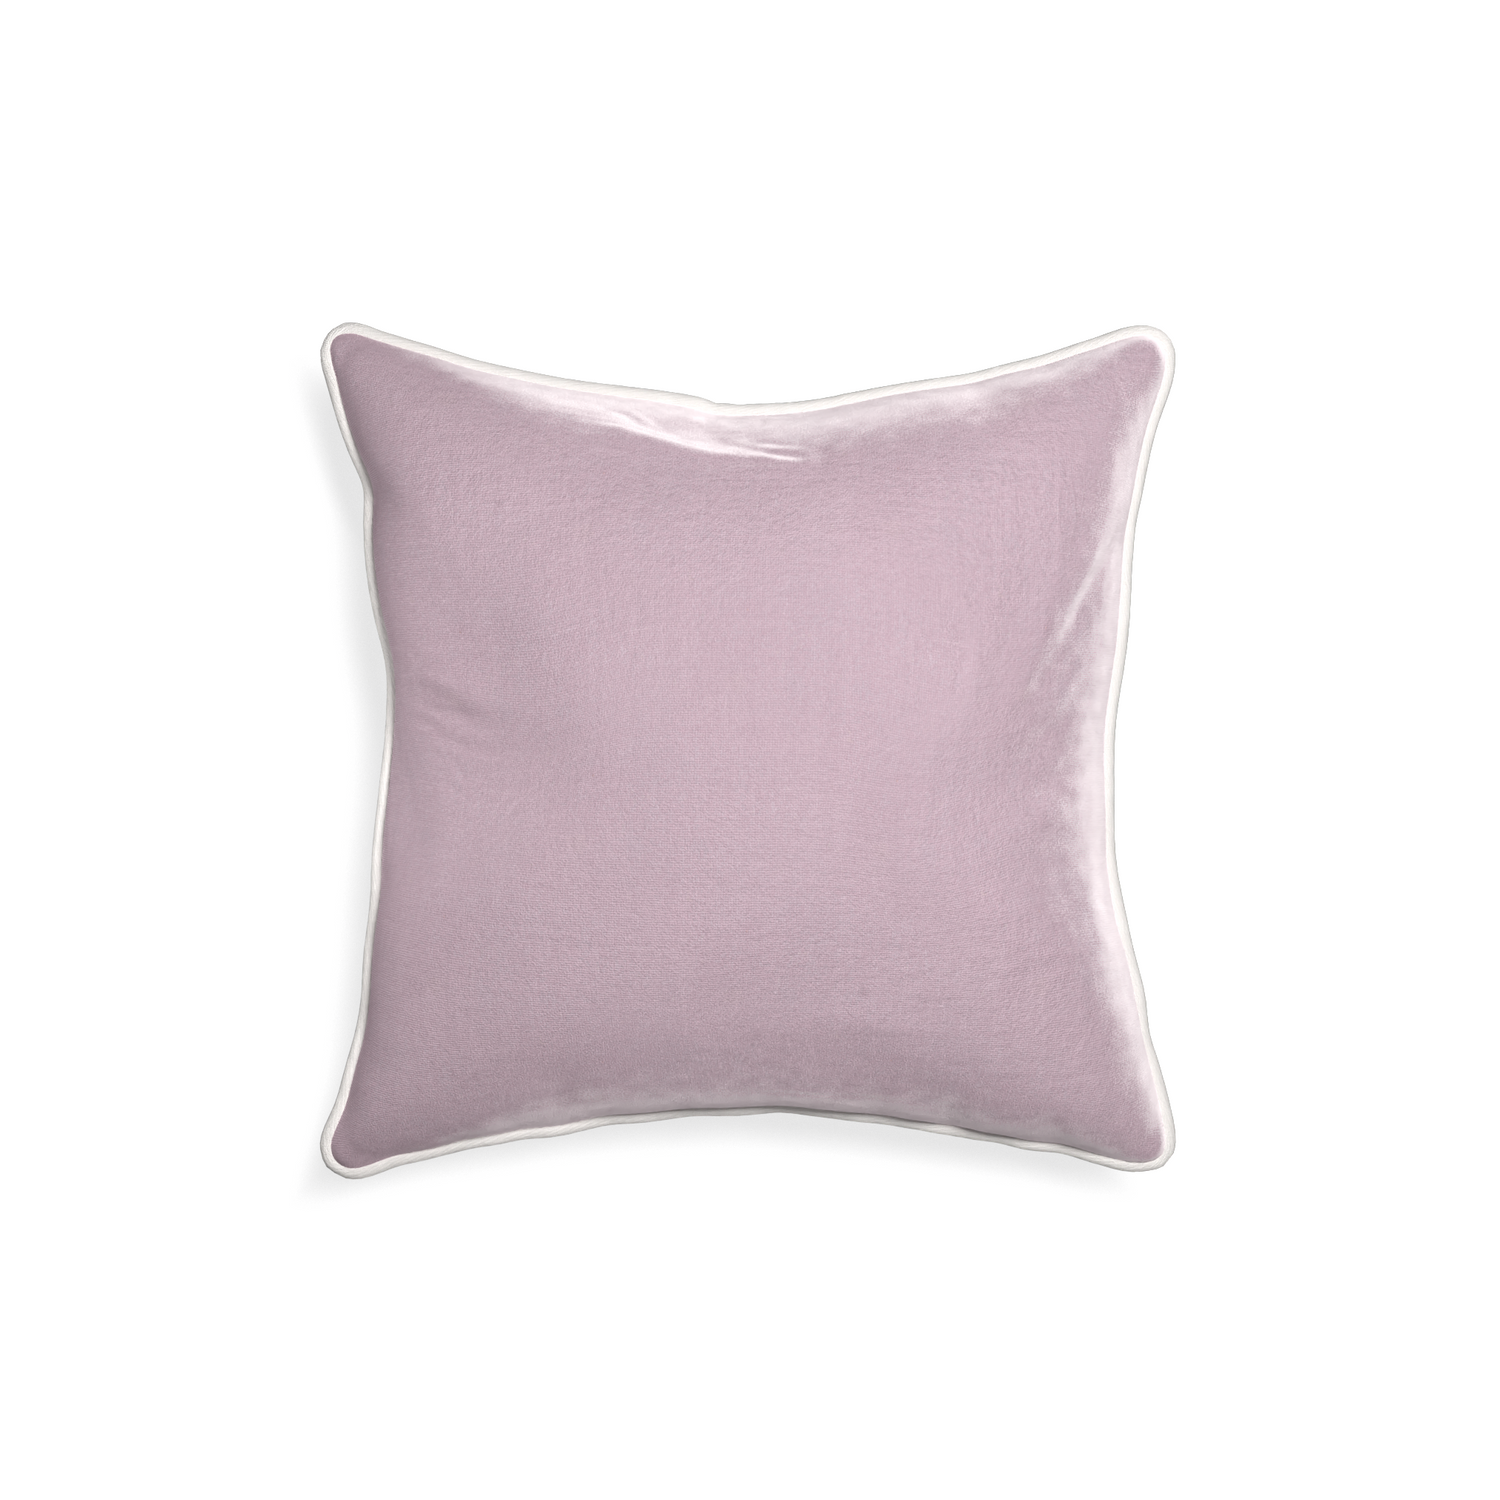 18-square lilac velvet custom pillow with snow piping on white background